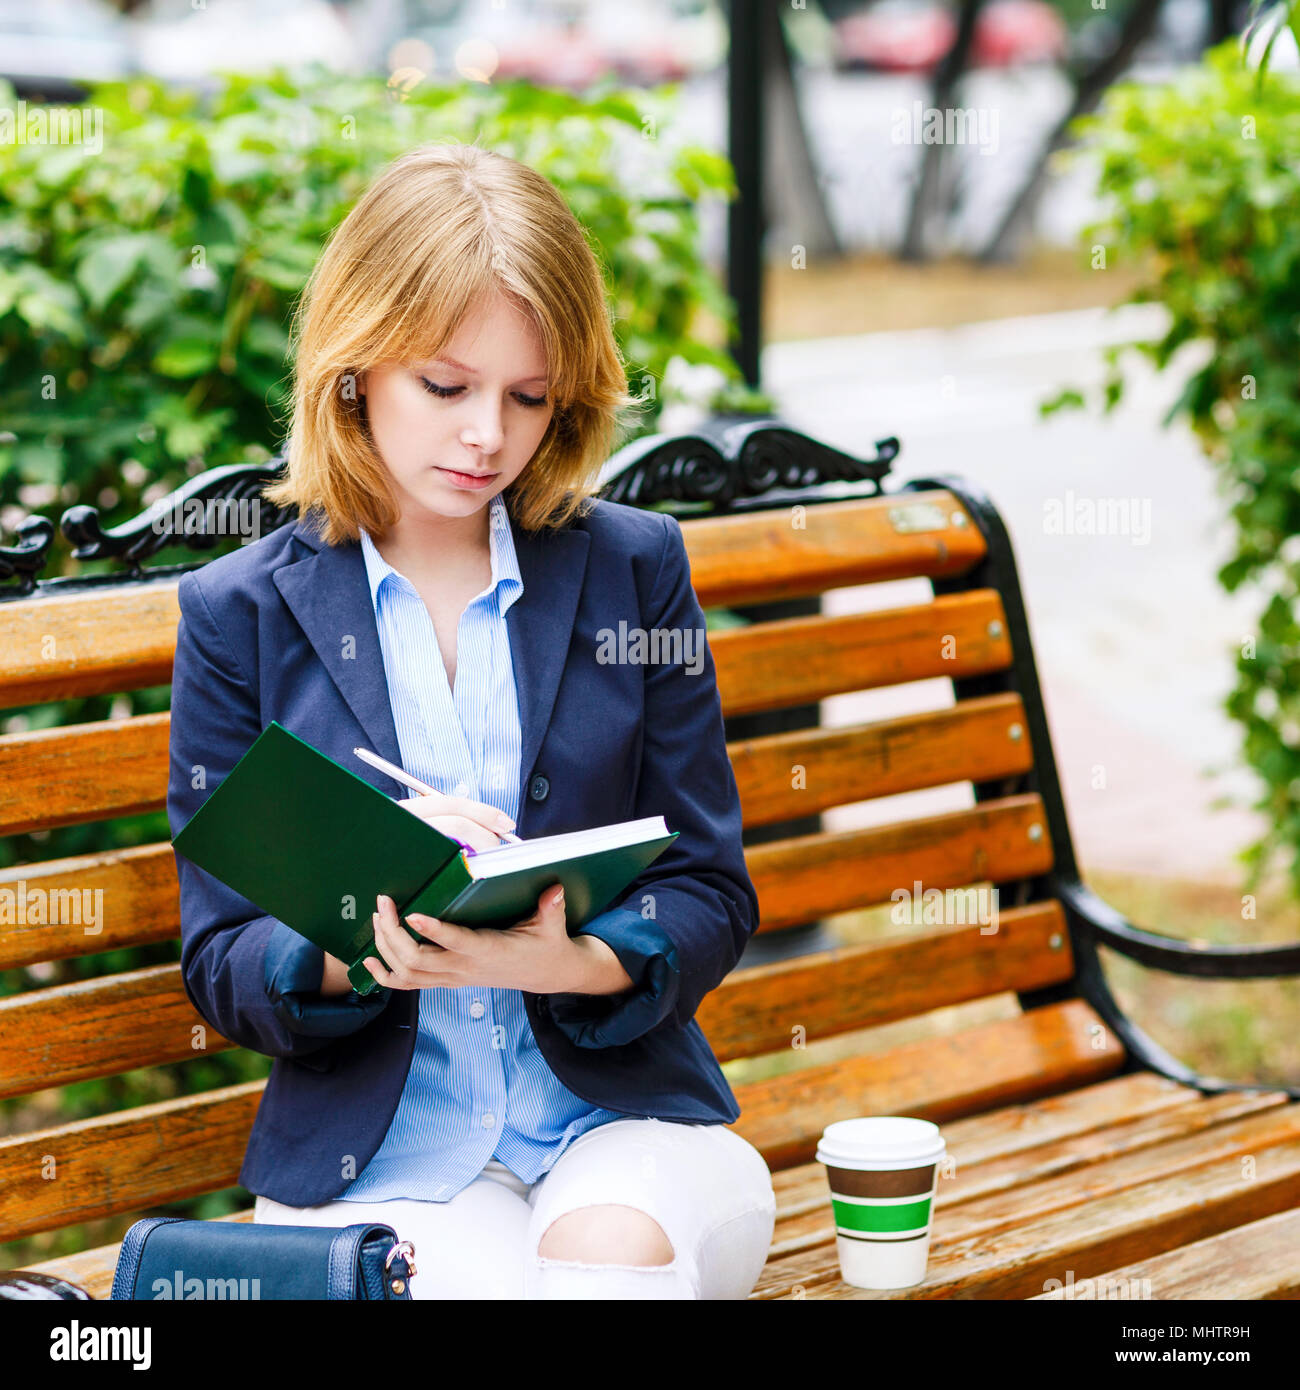 Young woman studying and writing in a park. Stock Photo